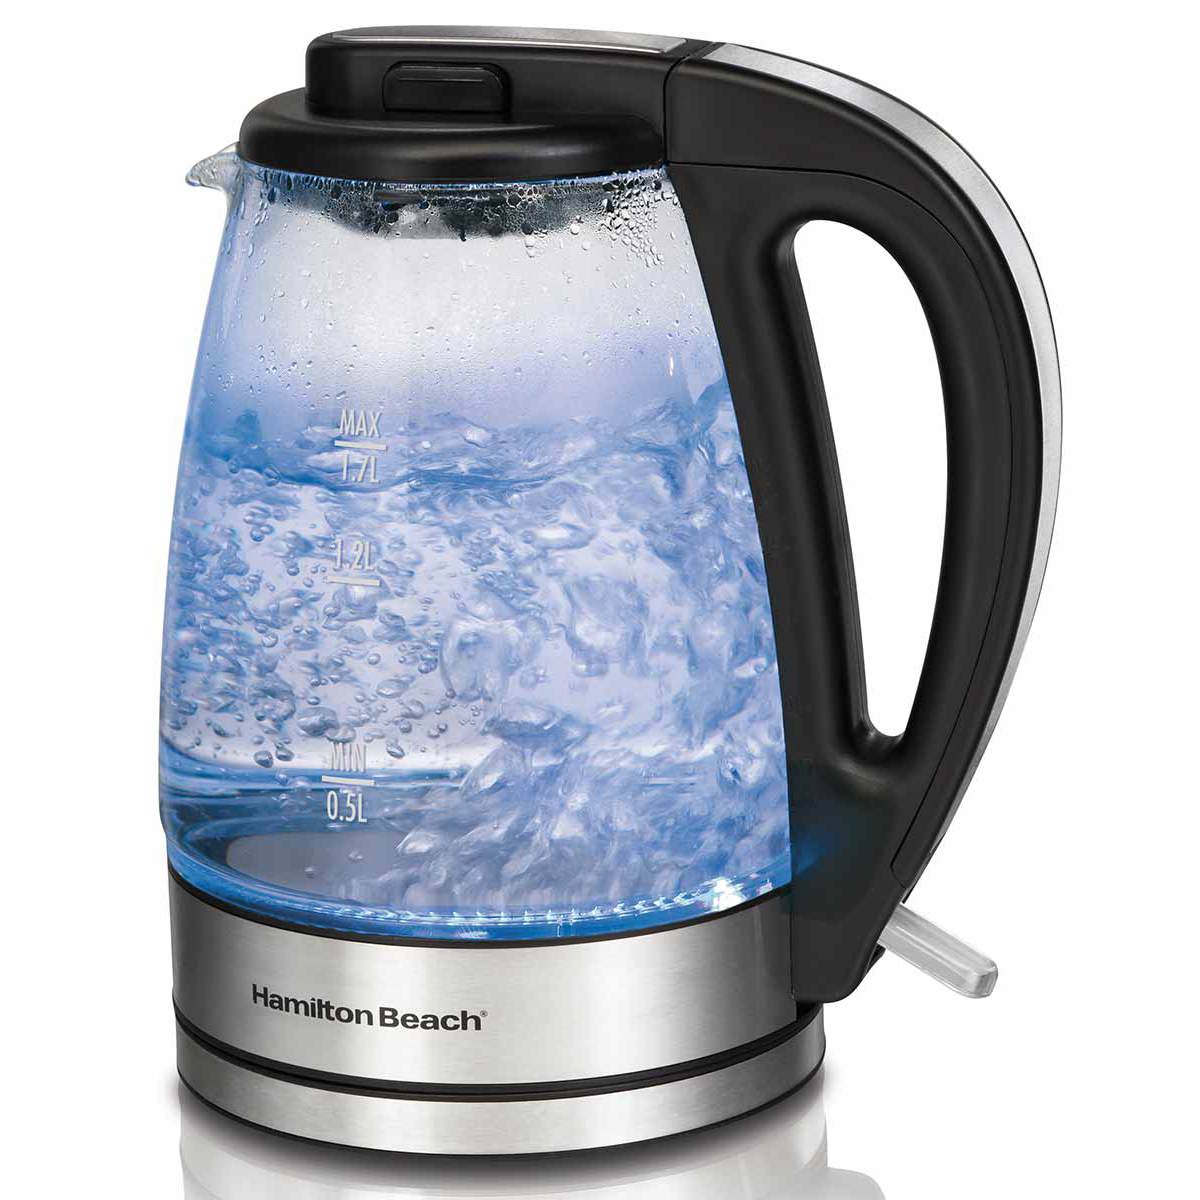 1.7 Liter Glass Electric Kettle - 40865